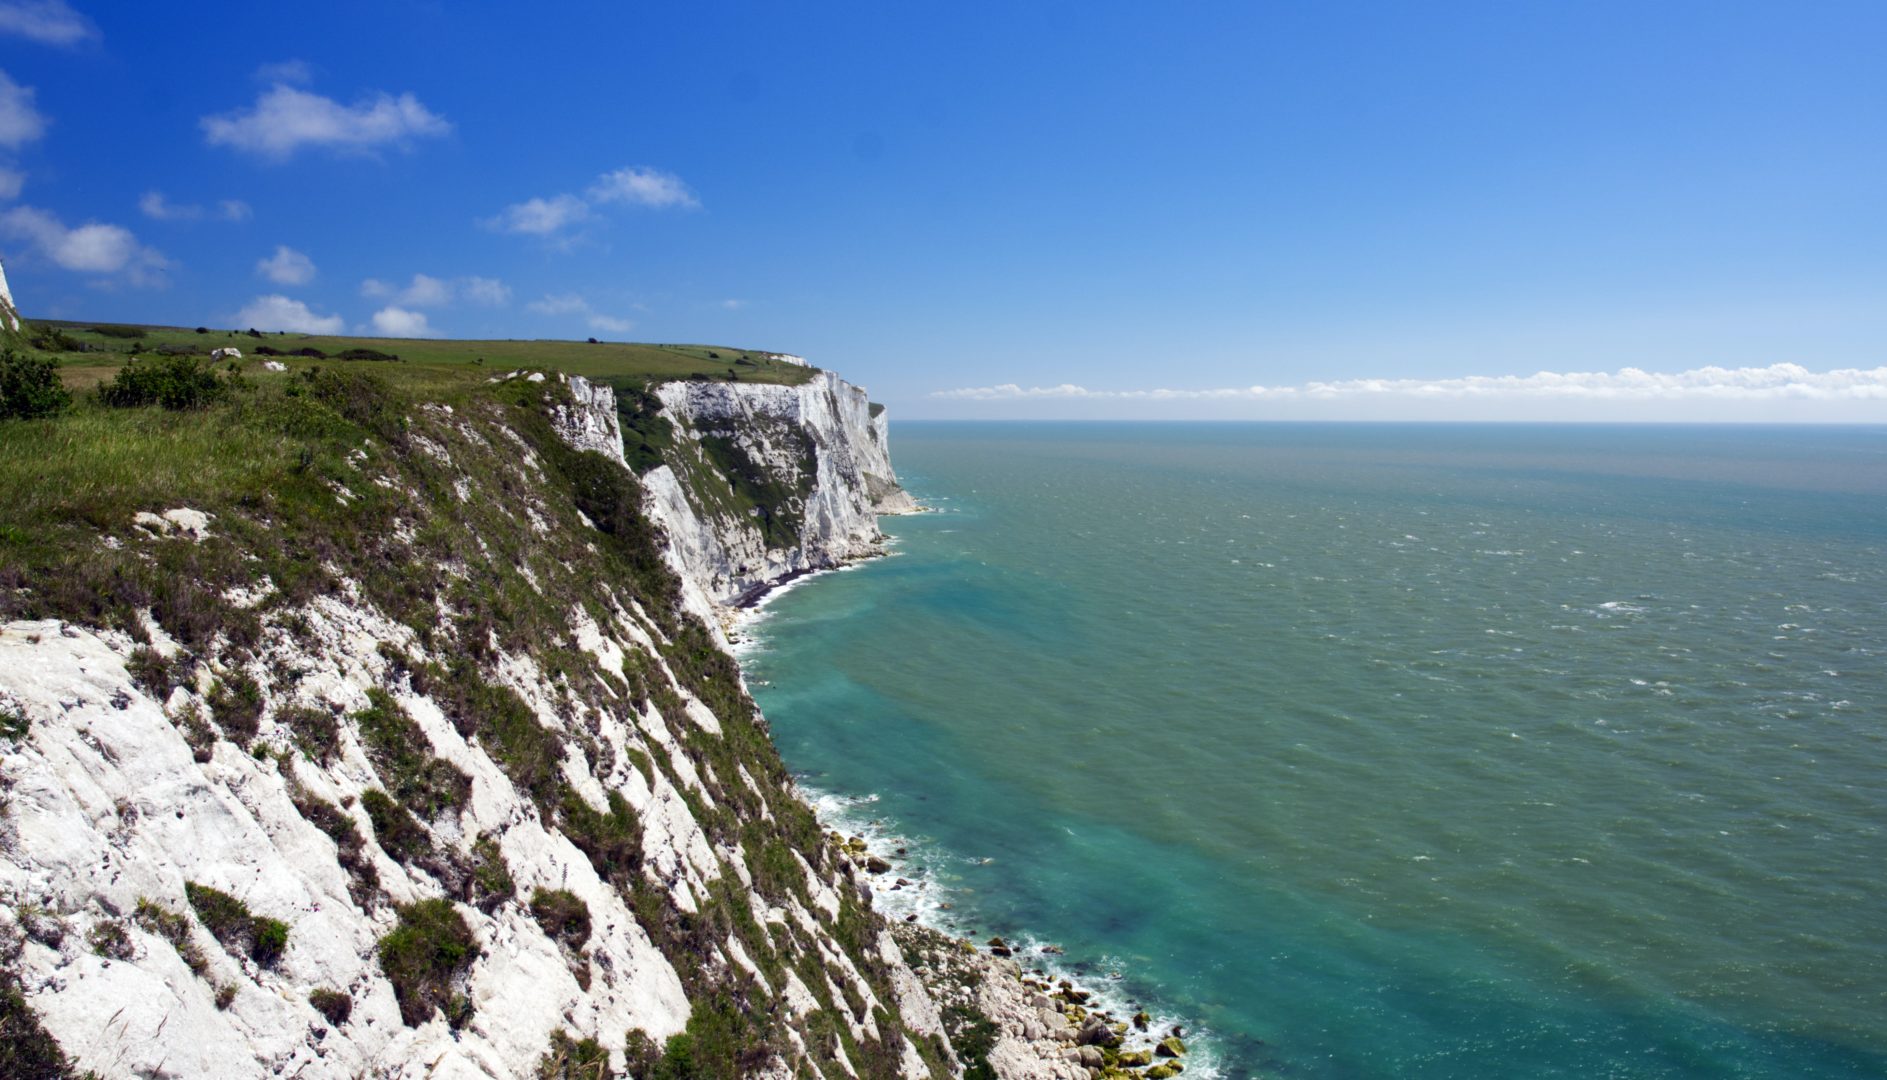 The white cliffs of Dover with a blue sea